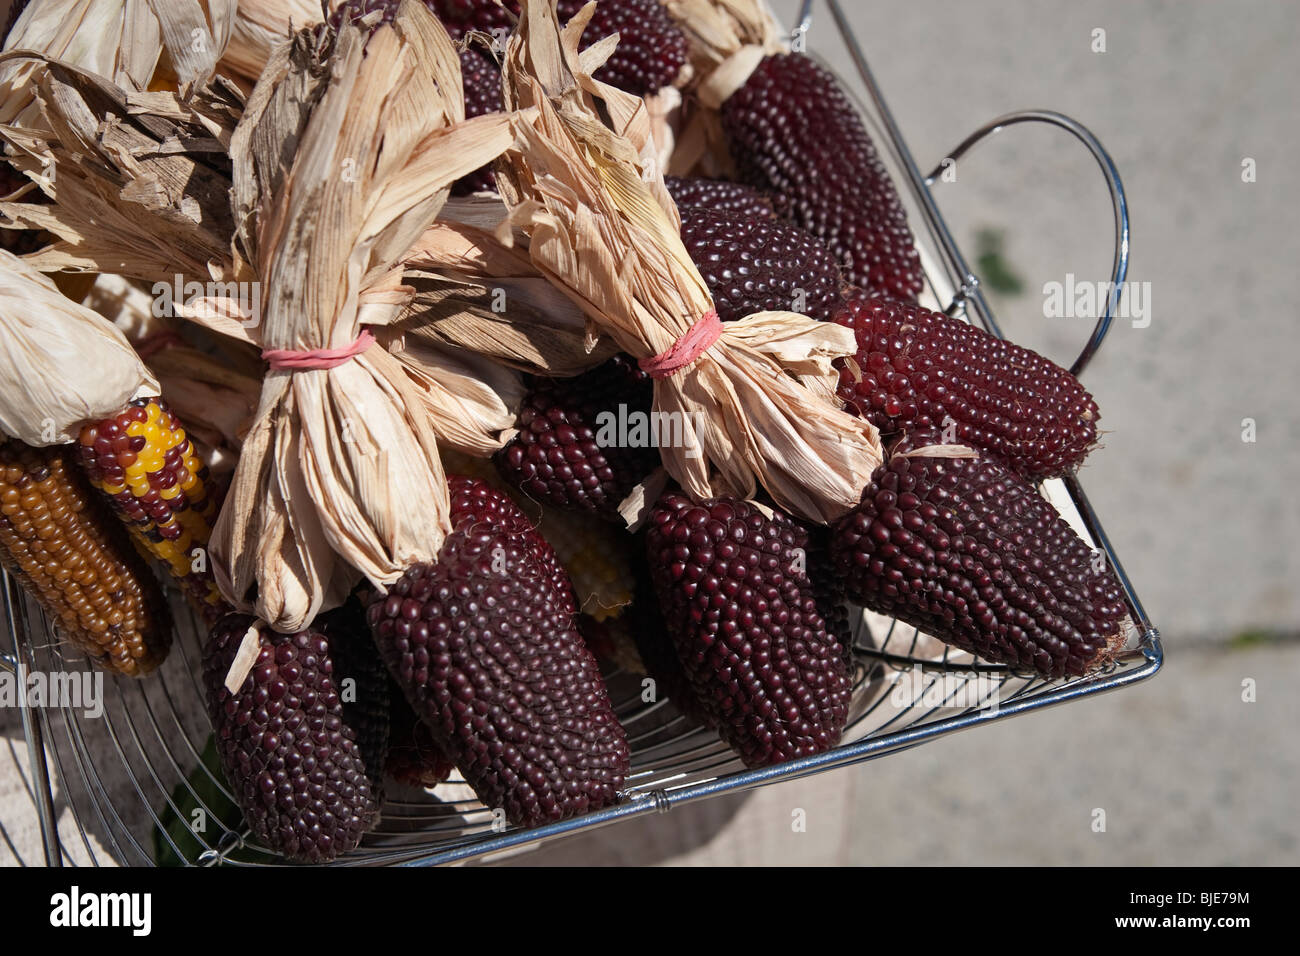 Zea mays L., blue corn cobs and stalks, organic non-GMO heirloom variety, as seen in Toronto, Canada Stock Photo